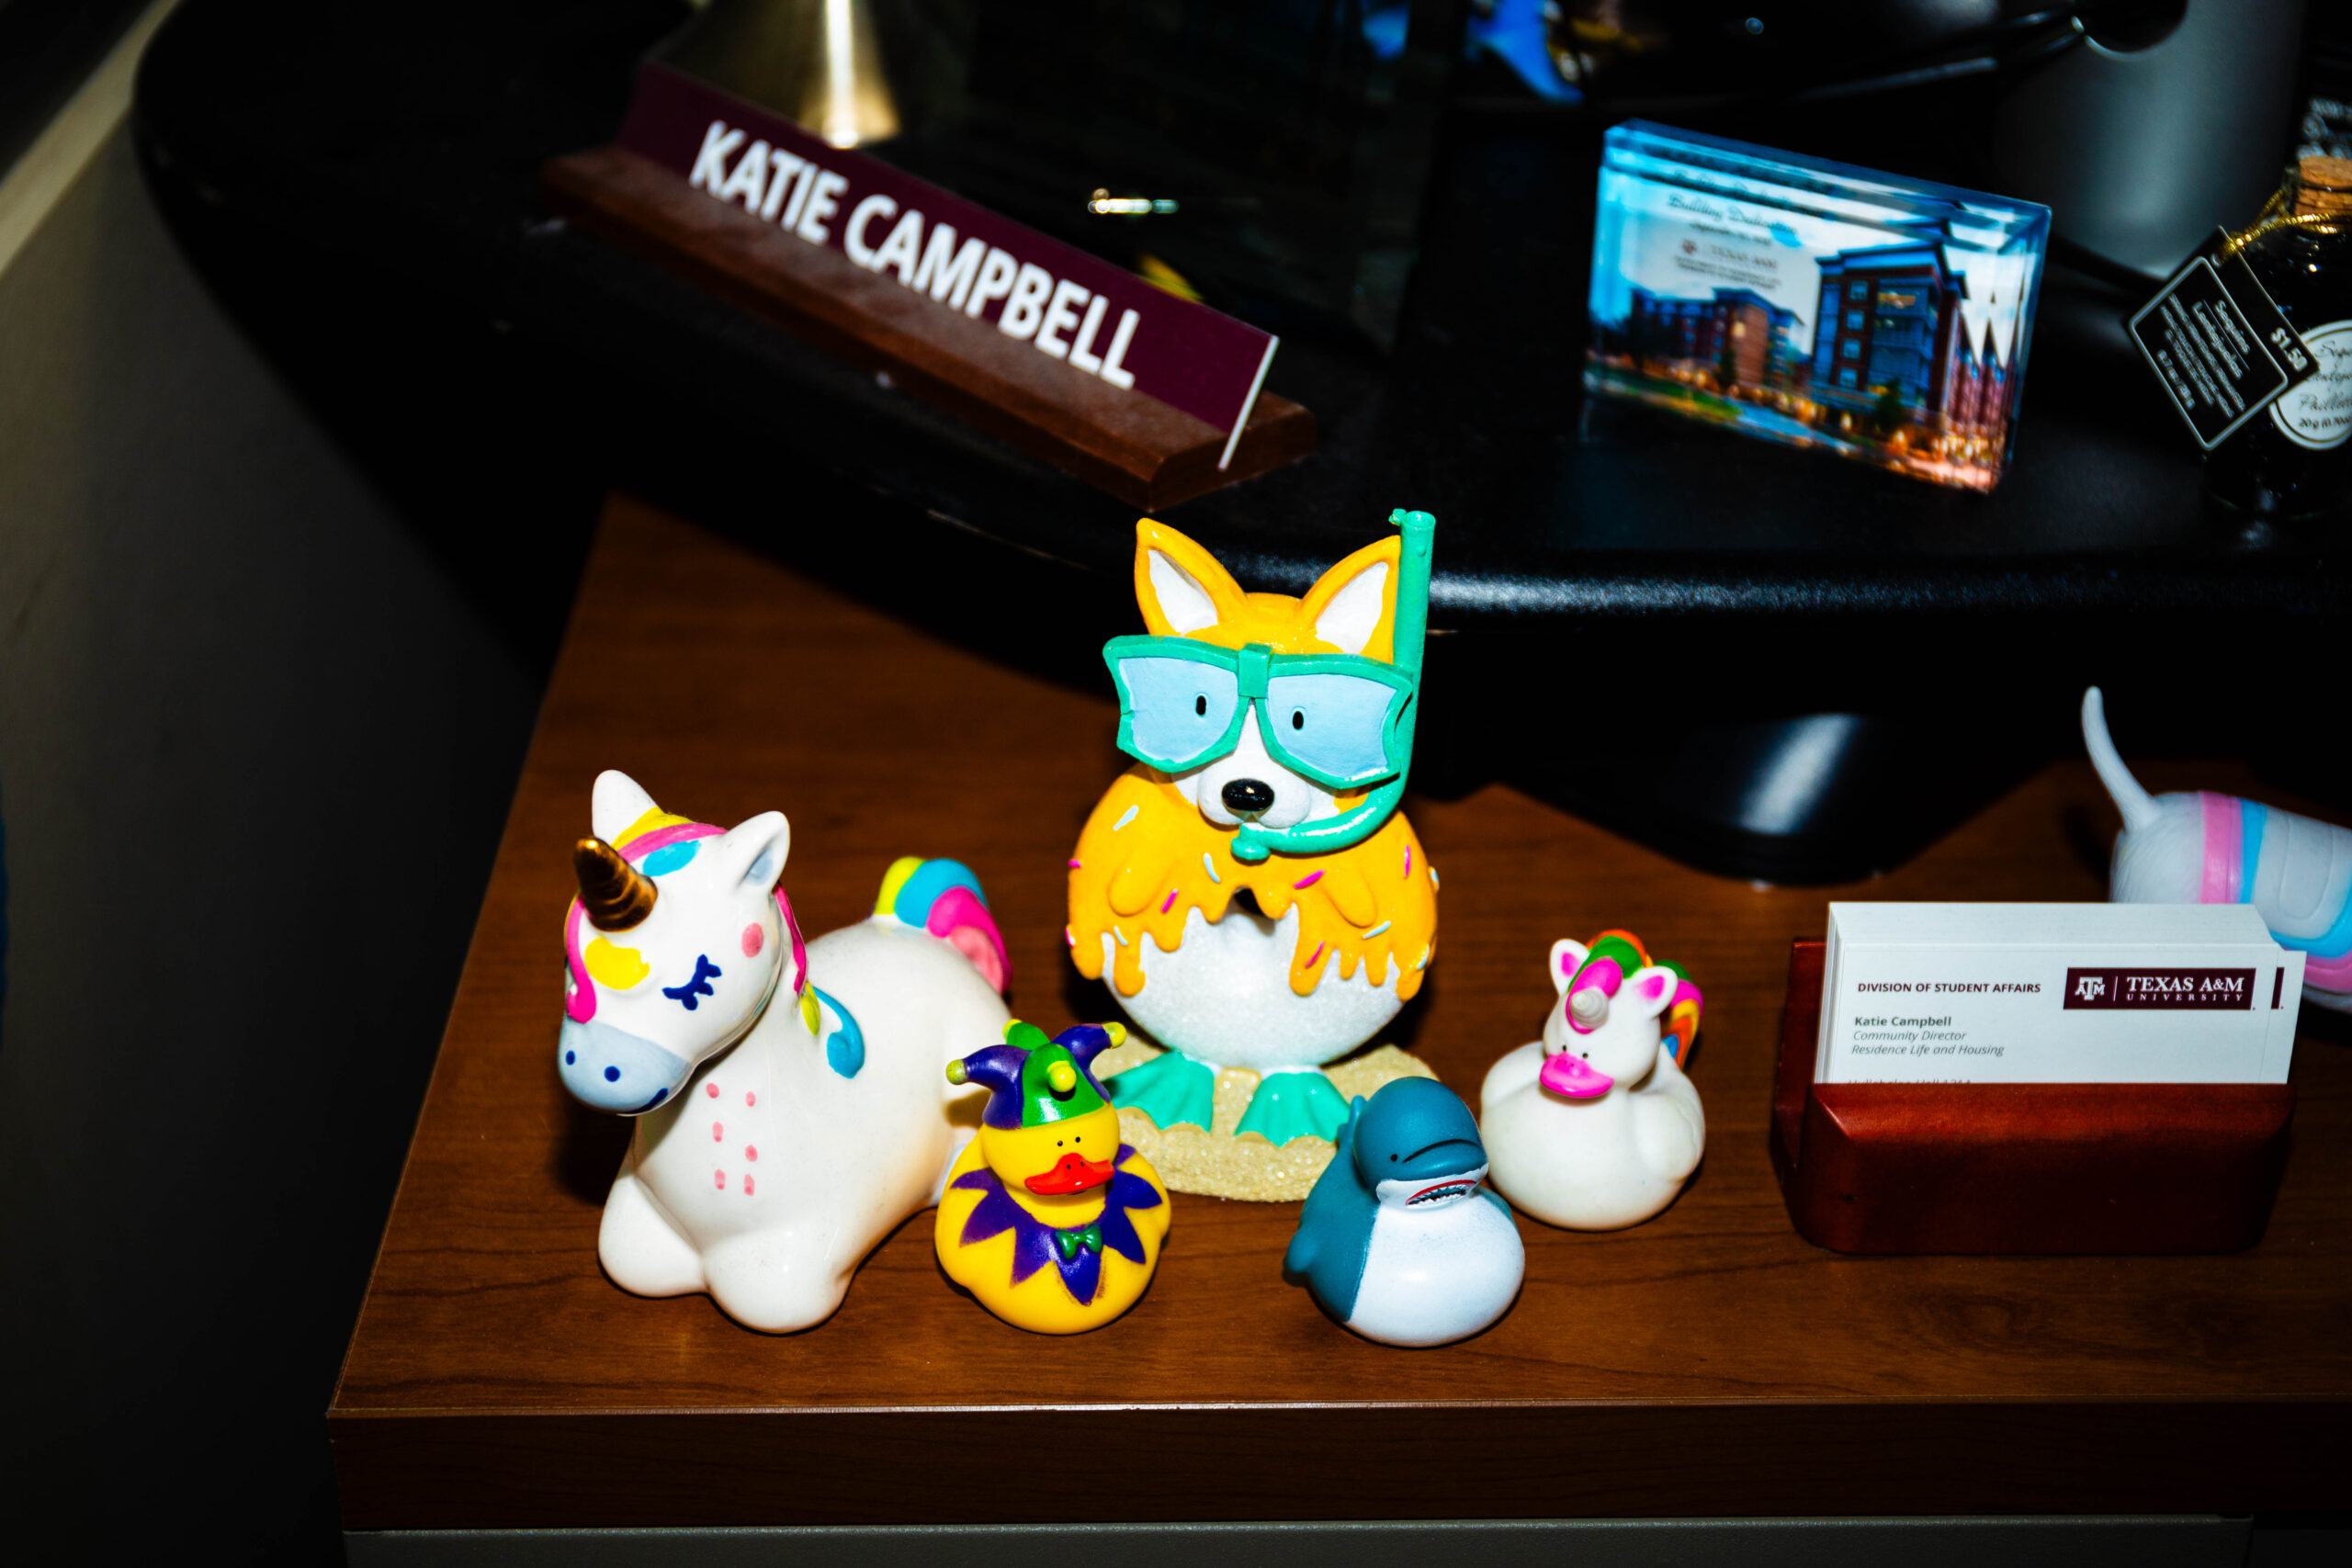 A colorful group of figurines sit on Katie's desk